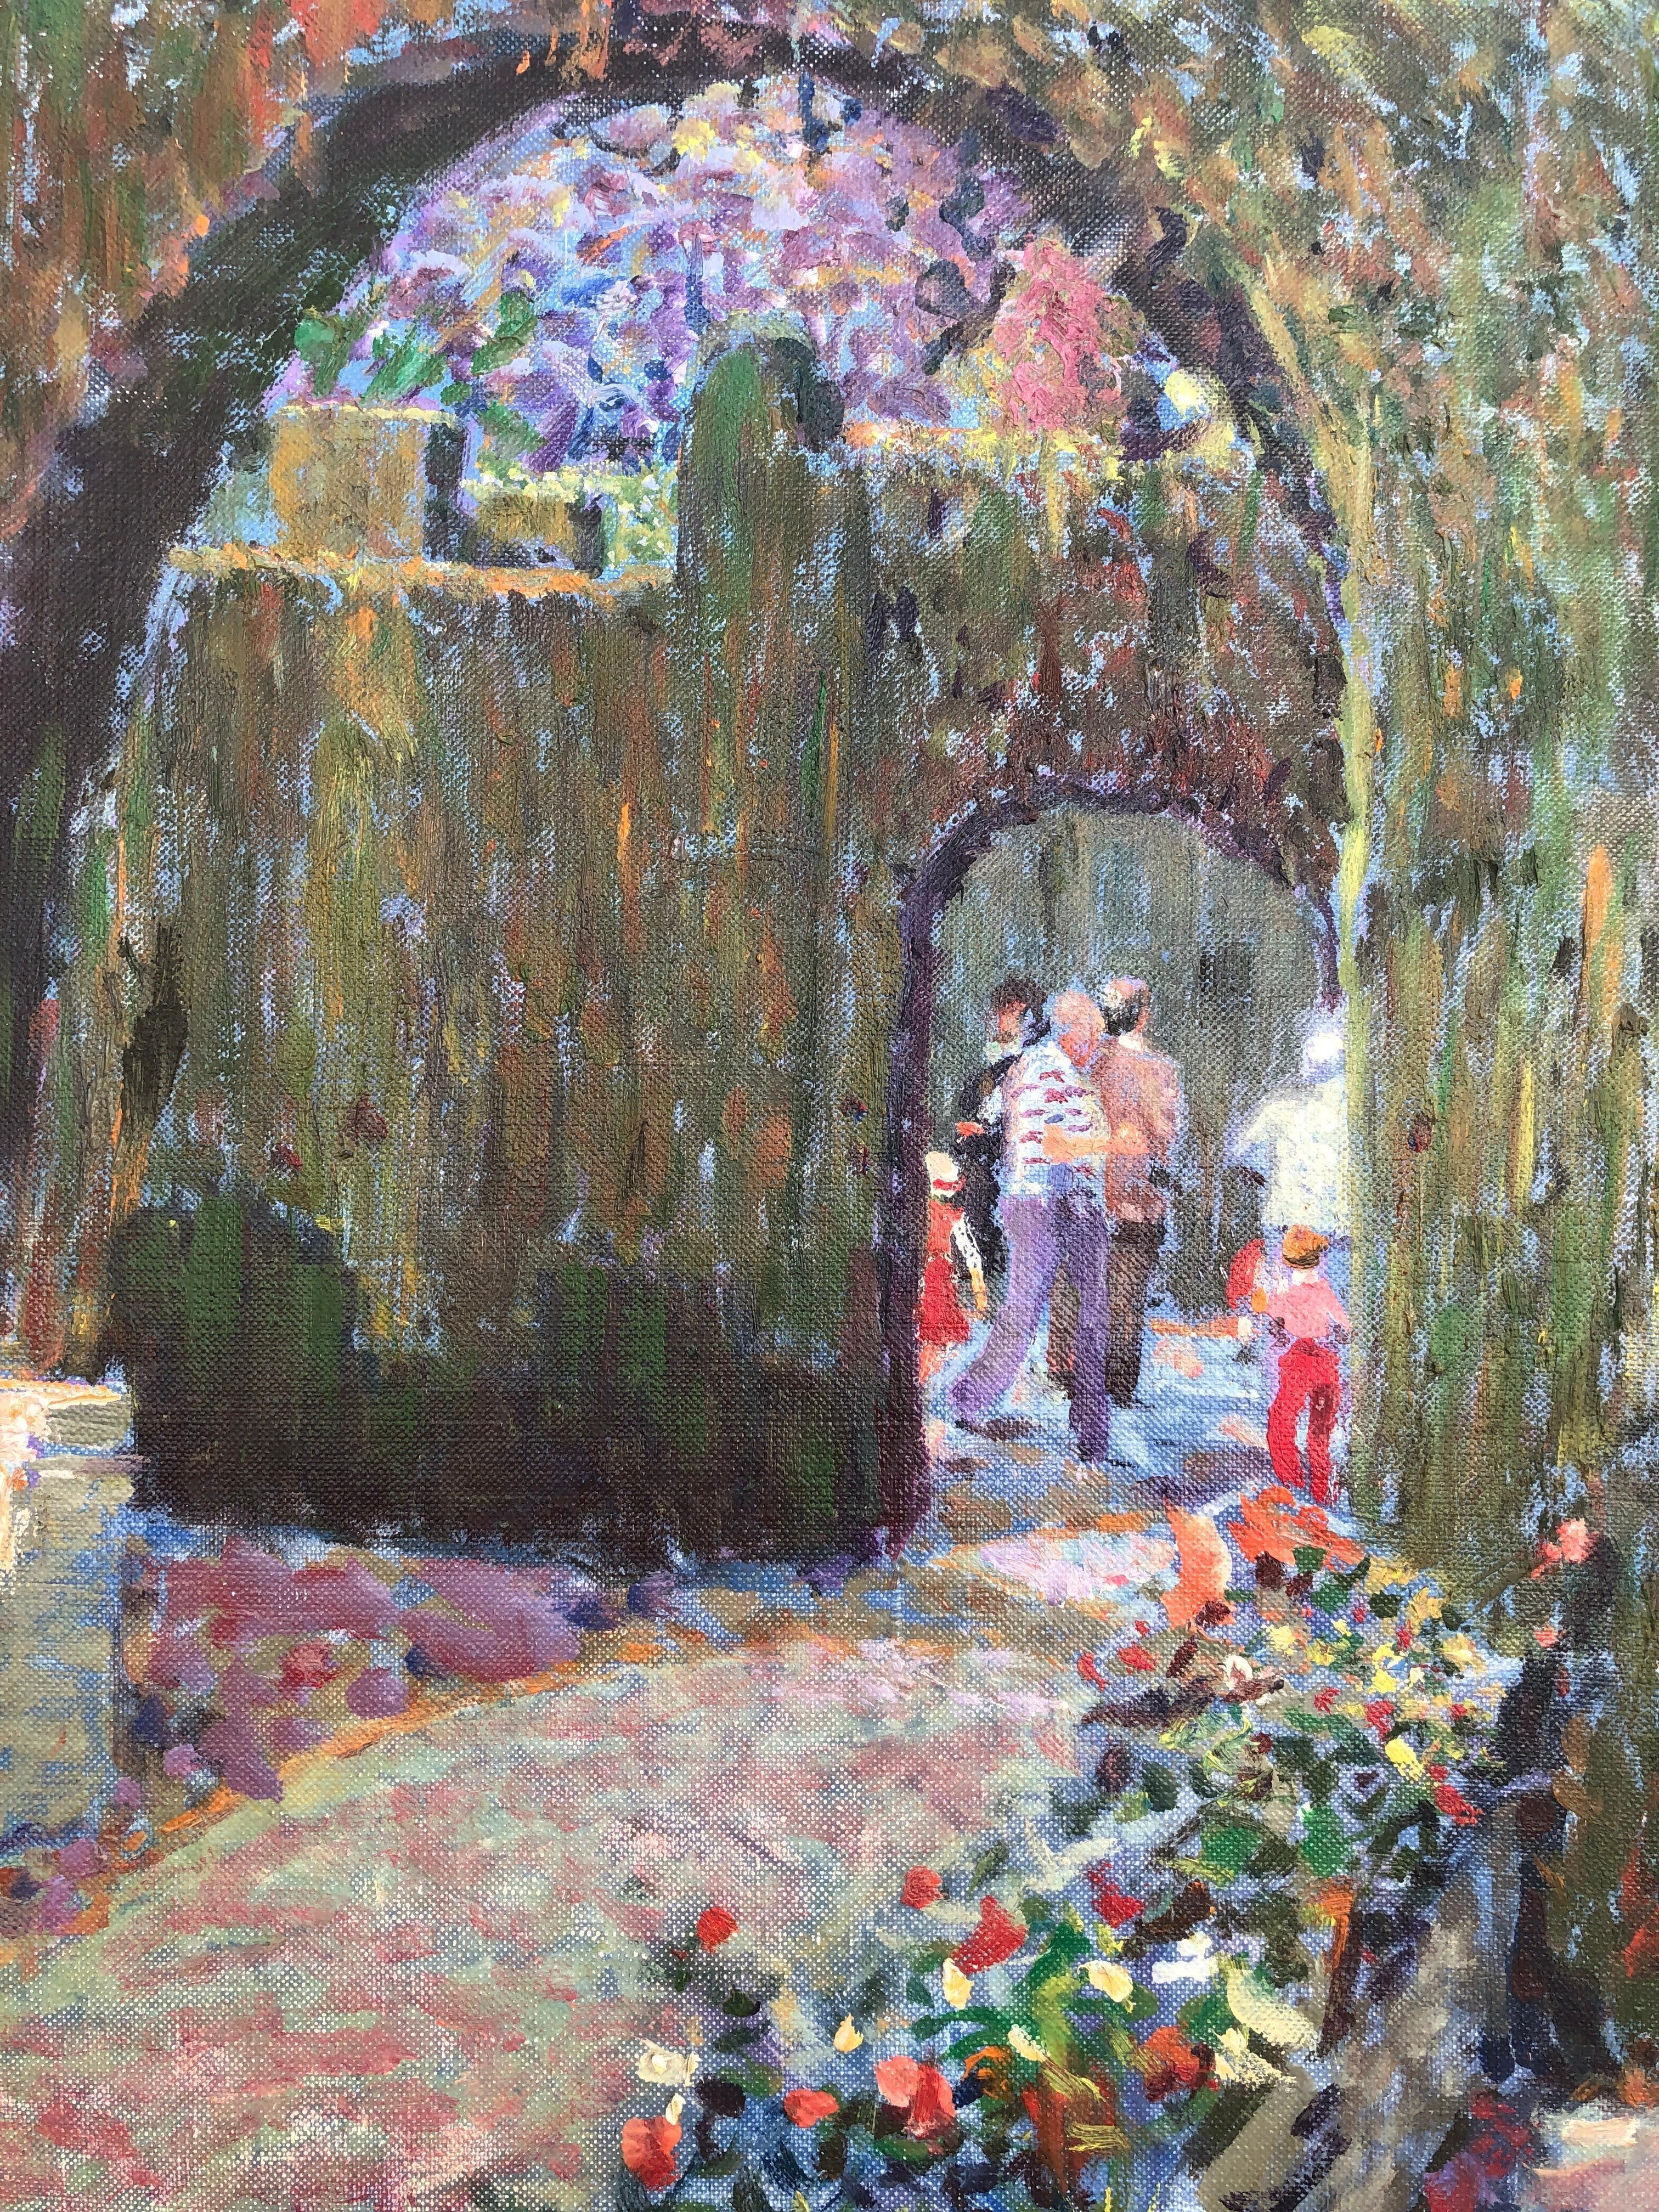 Labyrinth of Horta in Barcelona Spain oil on canvas painting - Gray Landscape Painting by Jordi Freixas Cortes